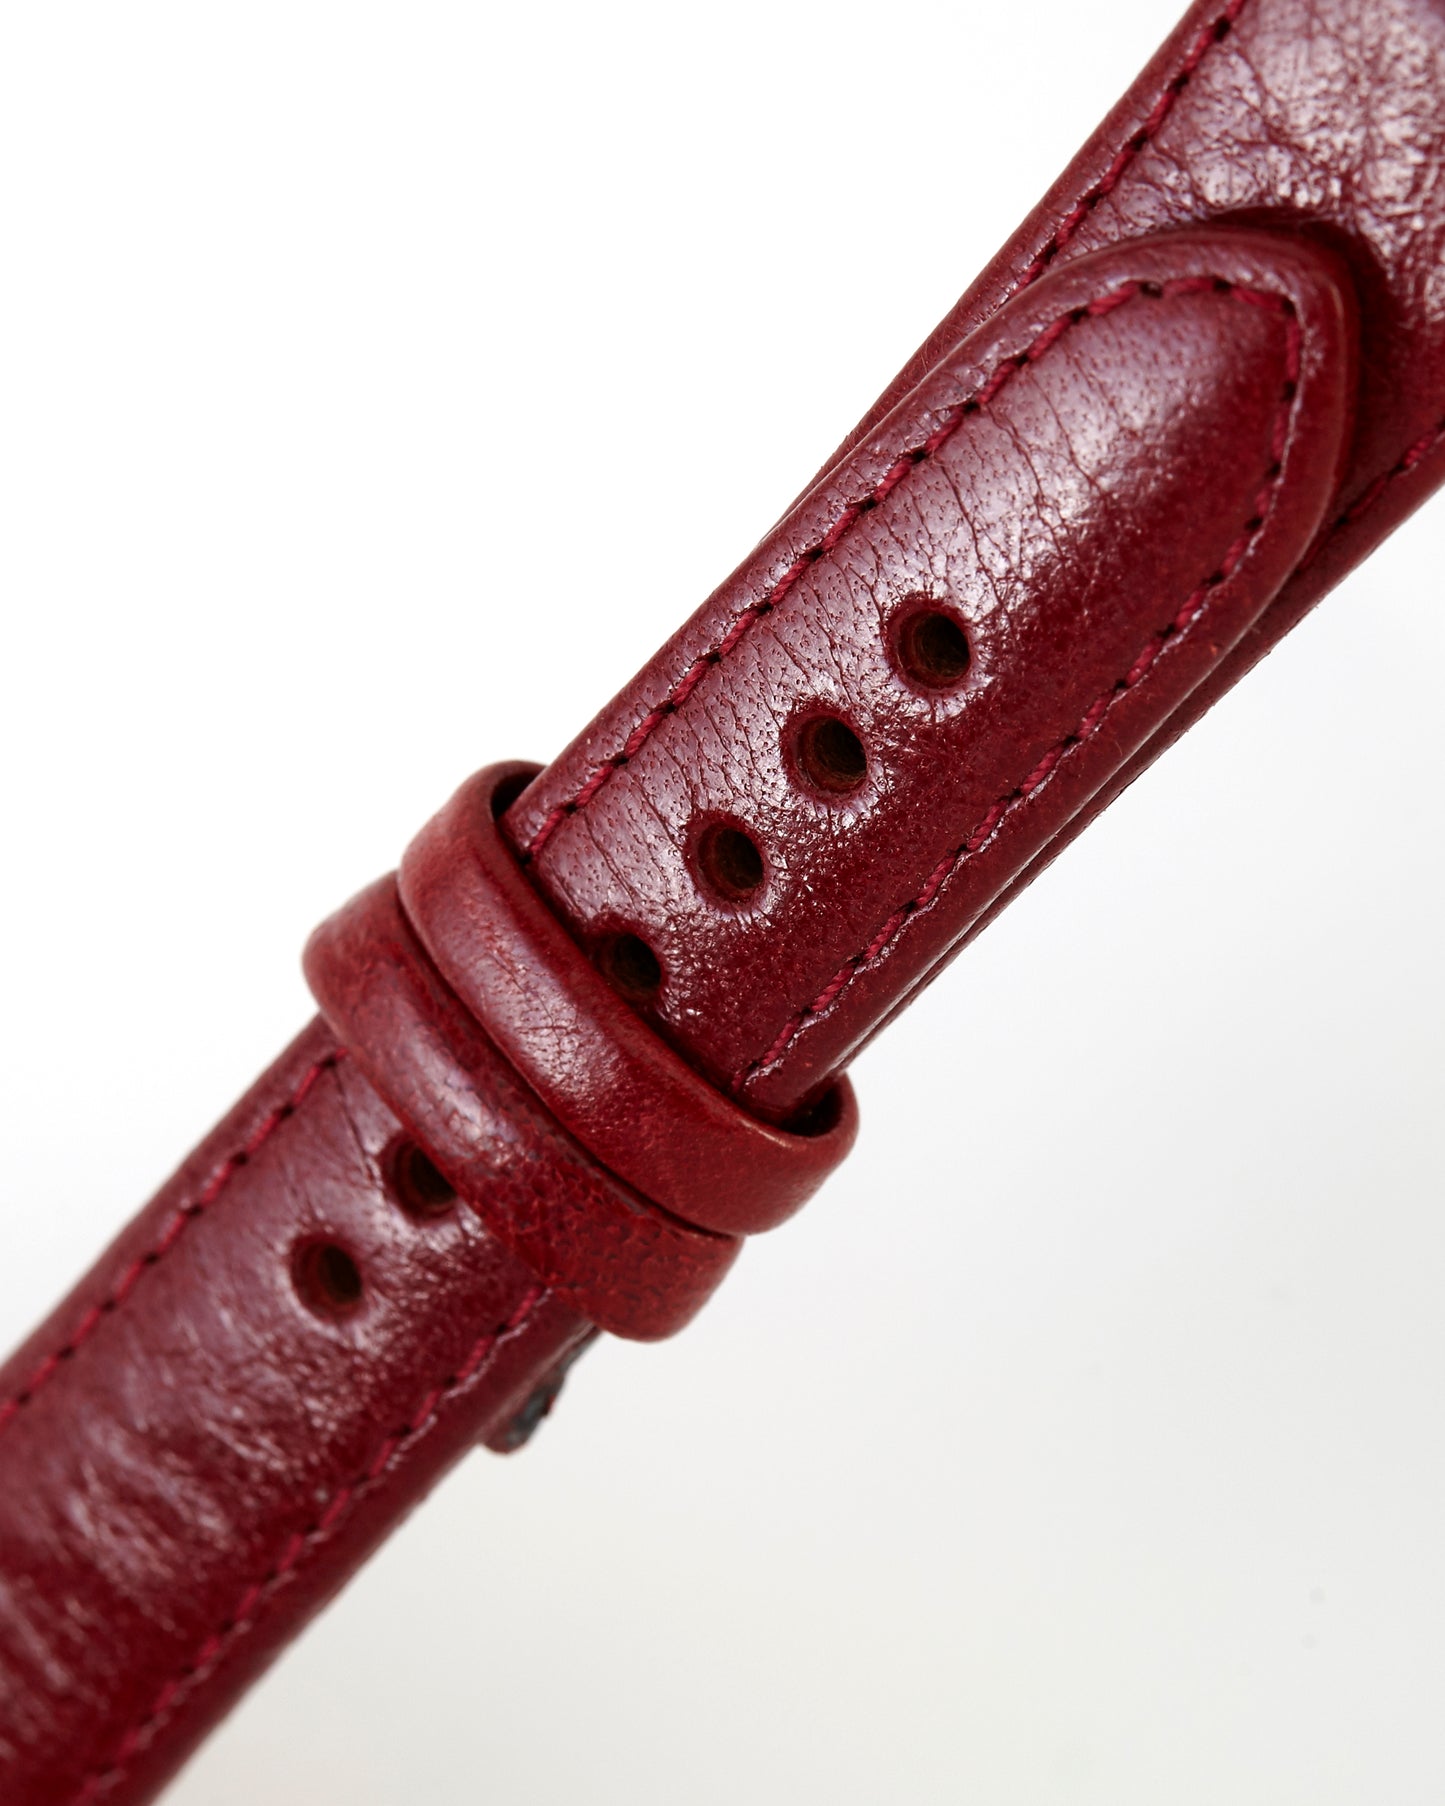 Ecclissi 14mm x 14mm Notched Red Leather Strap 22590